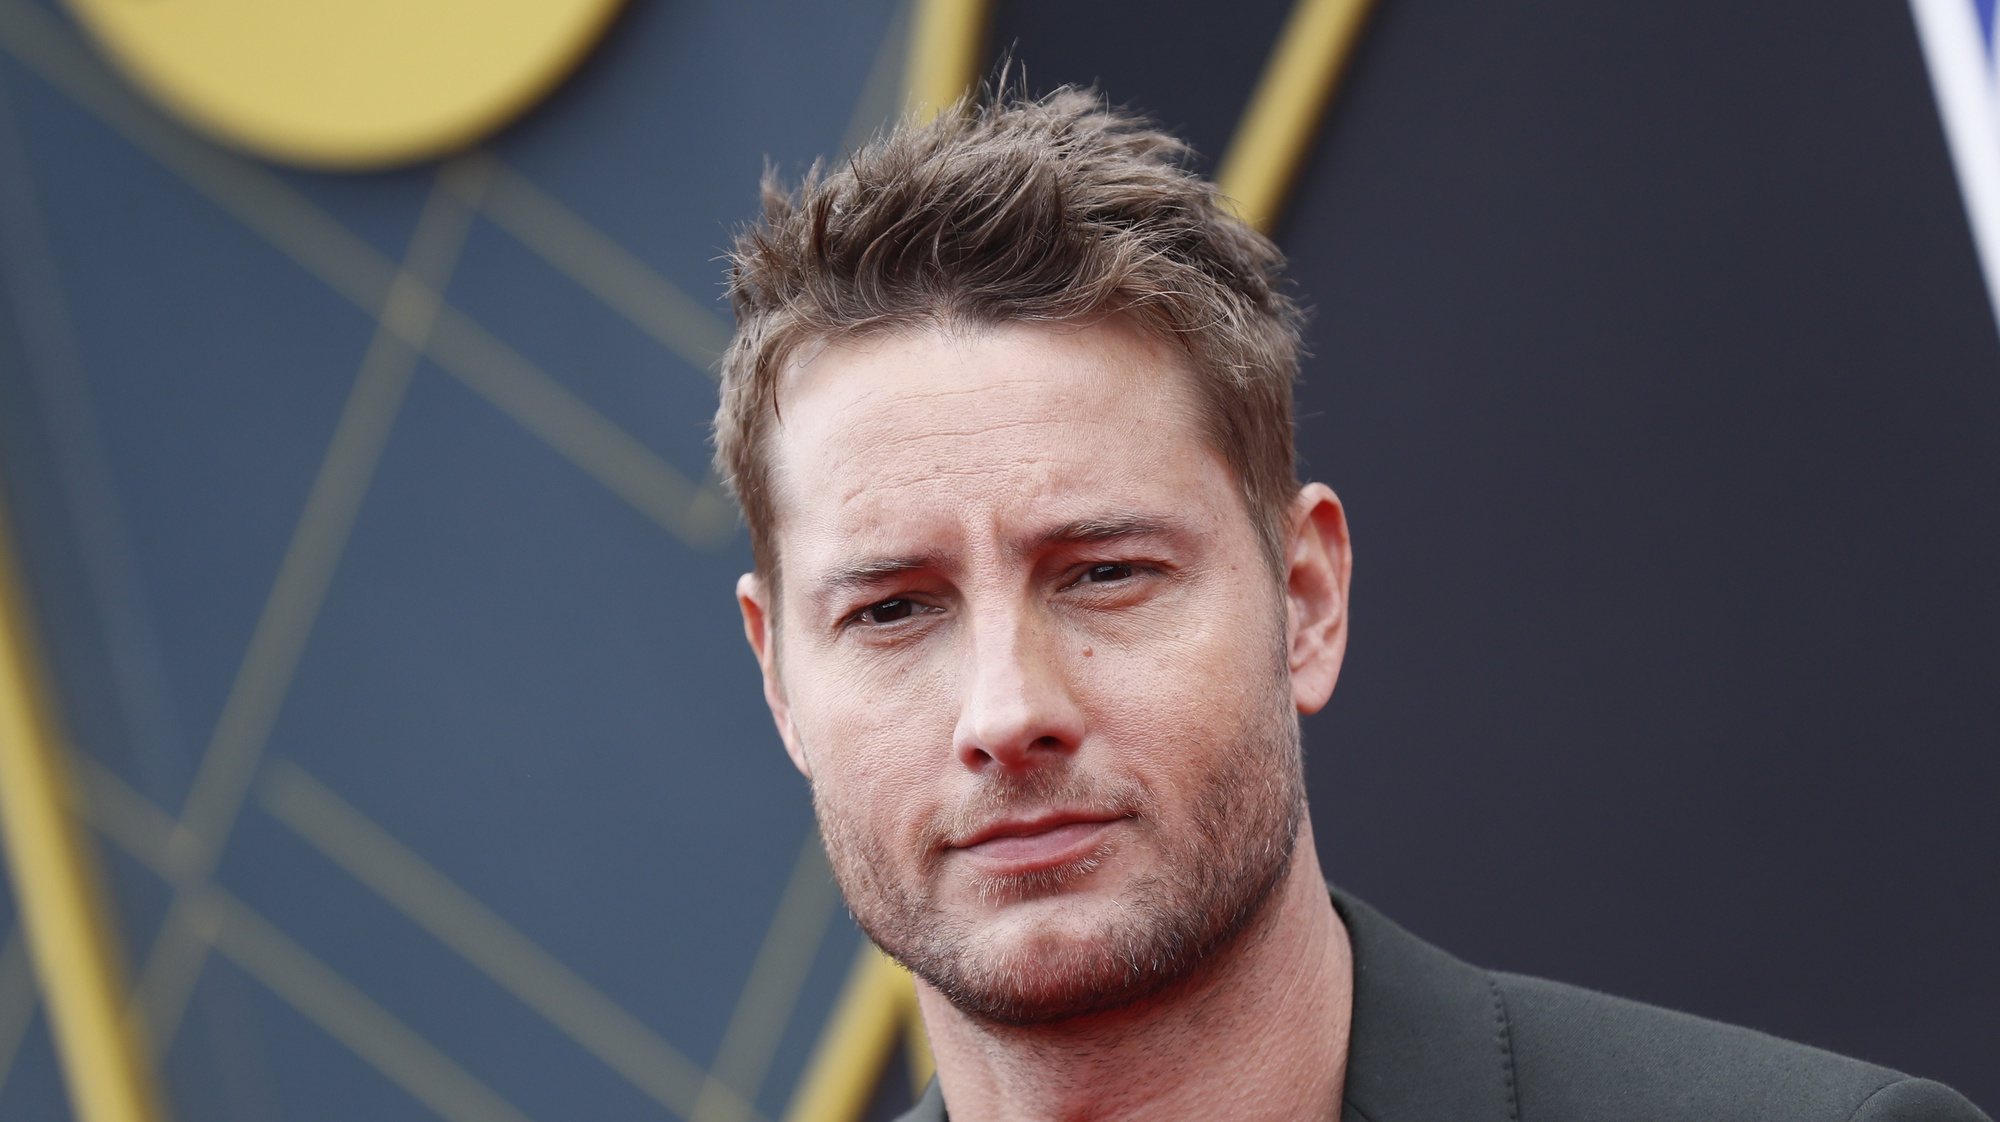 epa07671911 US actor Justin Hartley poses for photographers upon his arrival for the 2019 NBA Awards at Barker Hangar in Santa Monica, California, USA, 24 June 2019. The 2019 NBA Awards will be the 3rd annual awards show by the National Basketball Association (NBA).  EPA/ETIENNE LAURENT